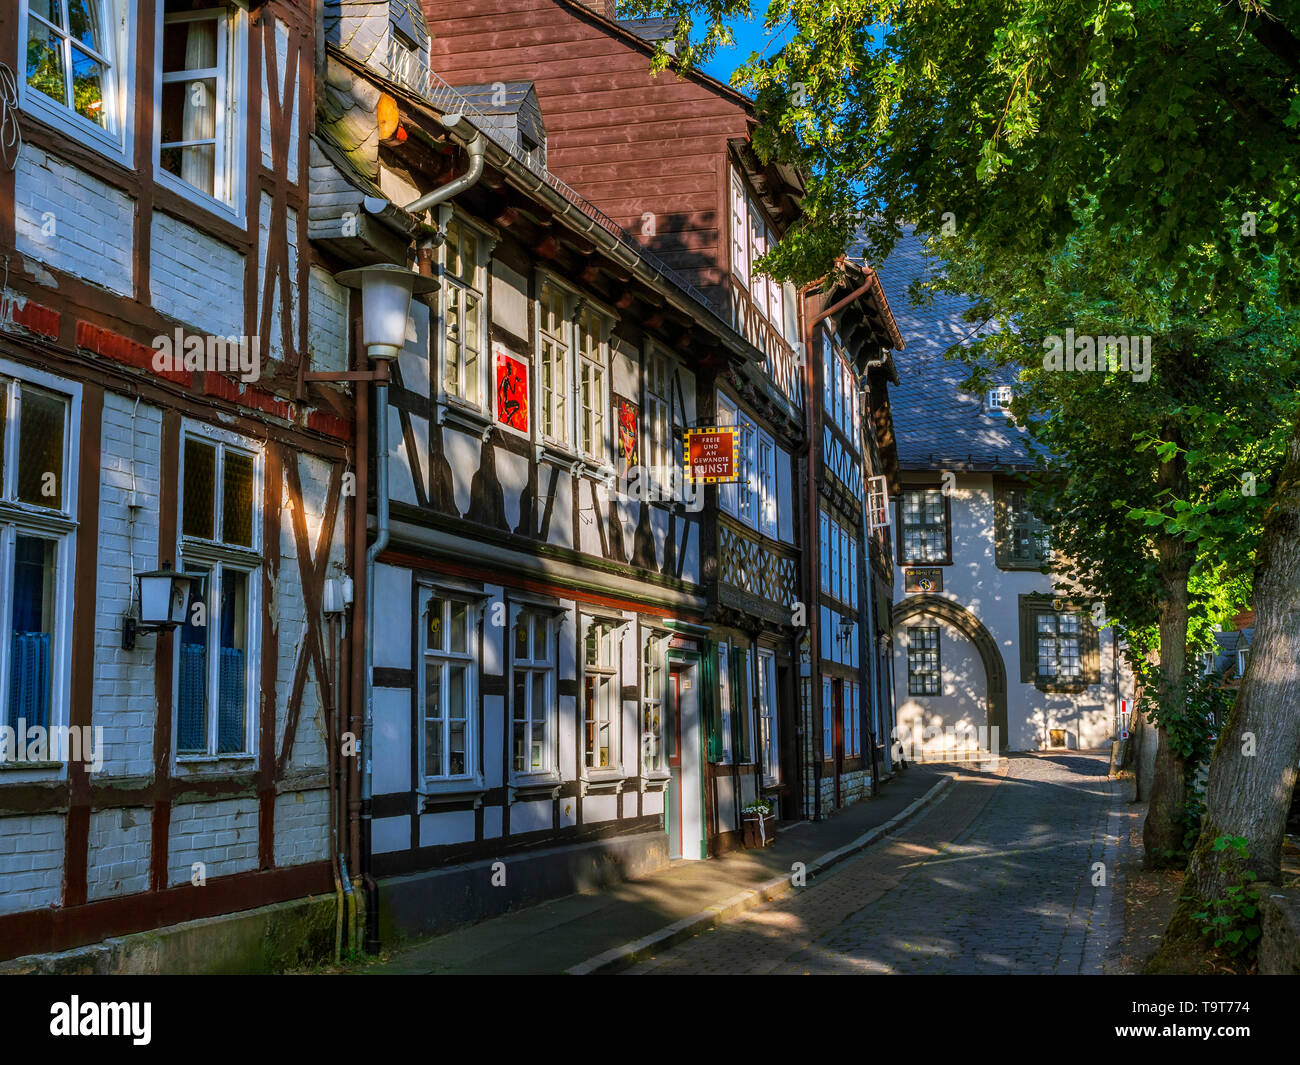 Historical Old Town in Goslar, UNESCO-world cultural heritage site, resin, Lower Saxony, Germany, Europe, Historische Altstadt in Goslar, UNESCO-Weltk Stock Photo